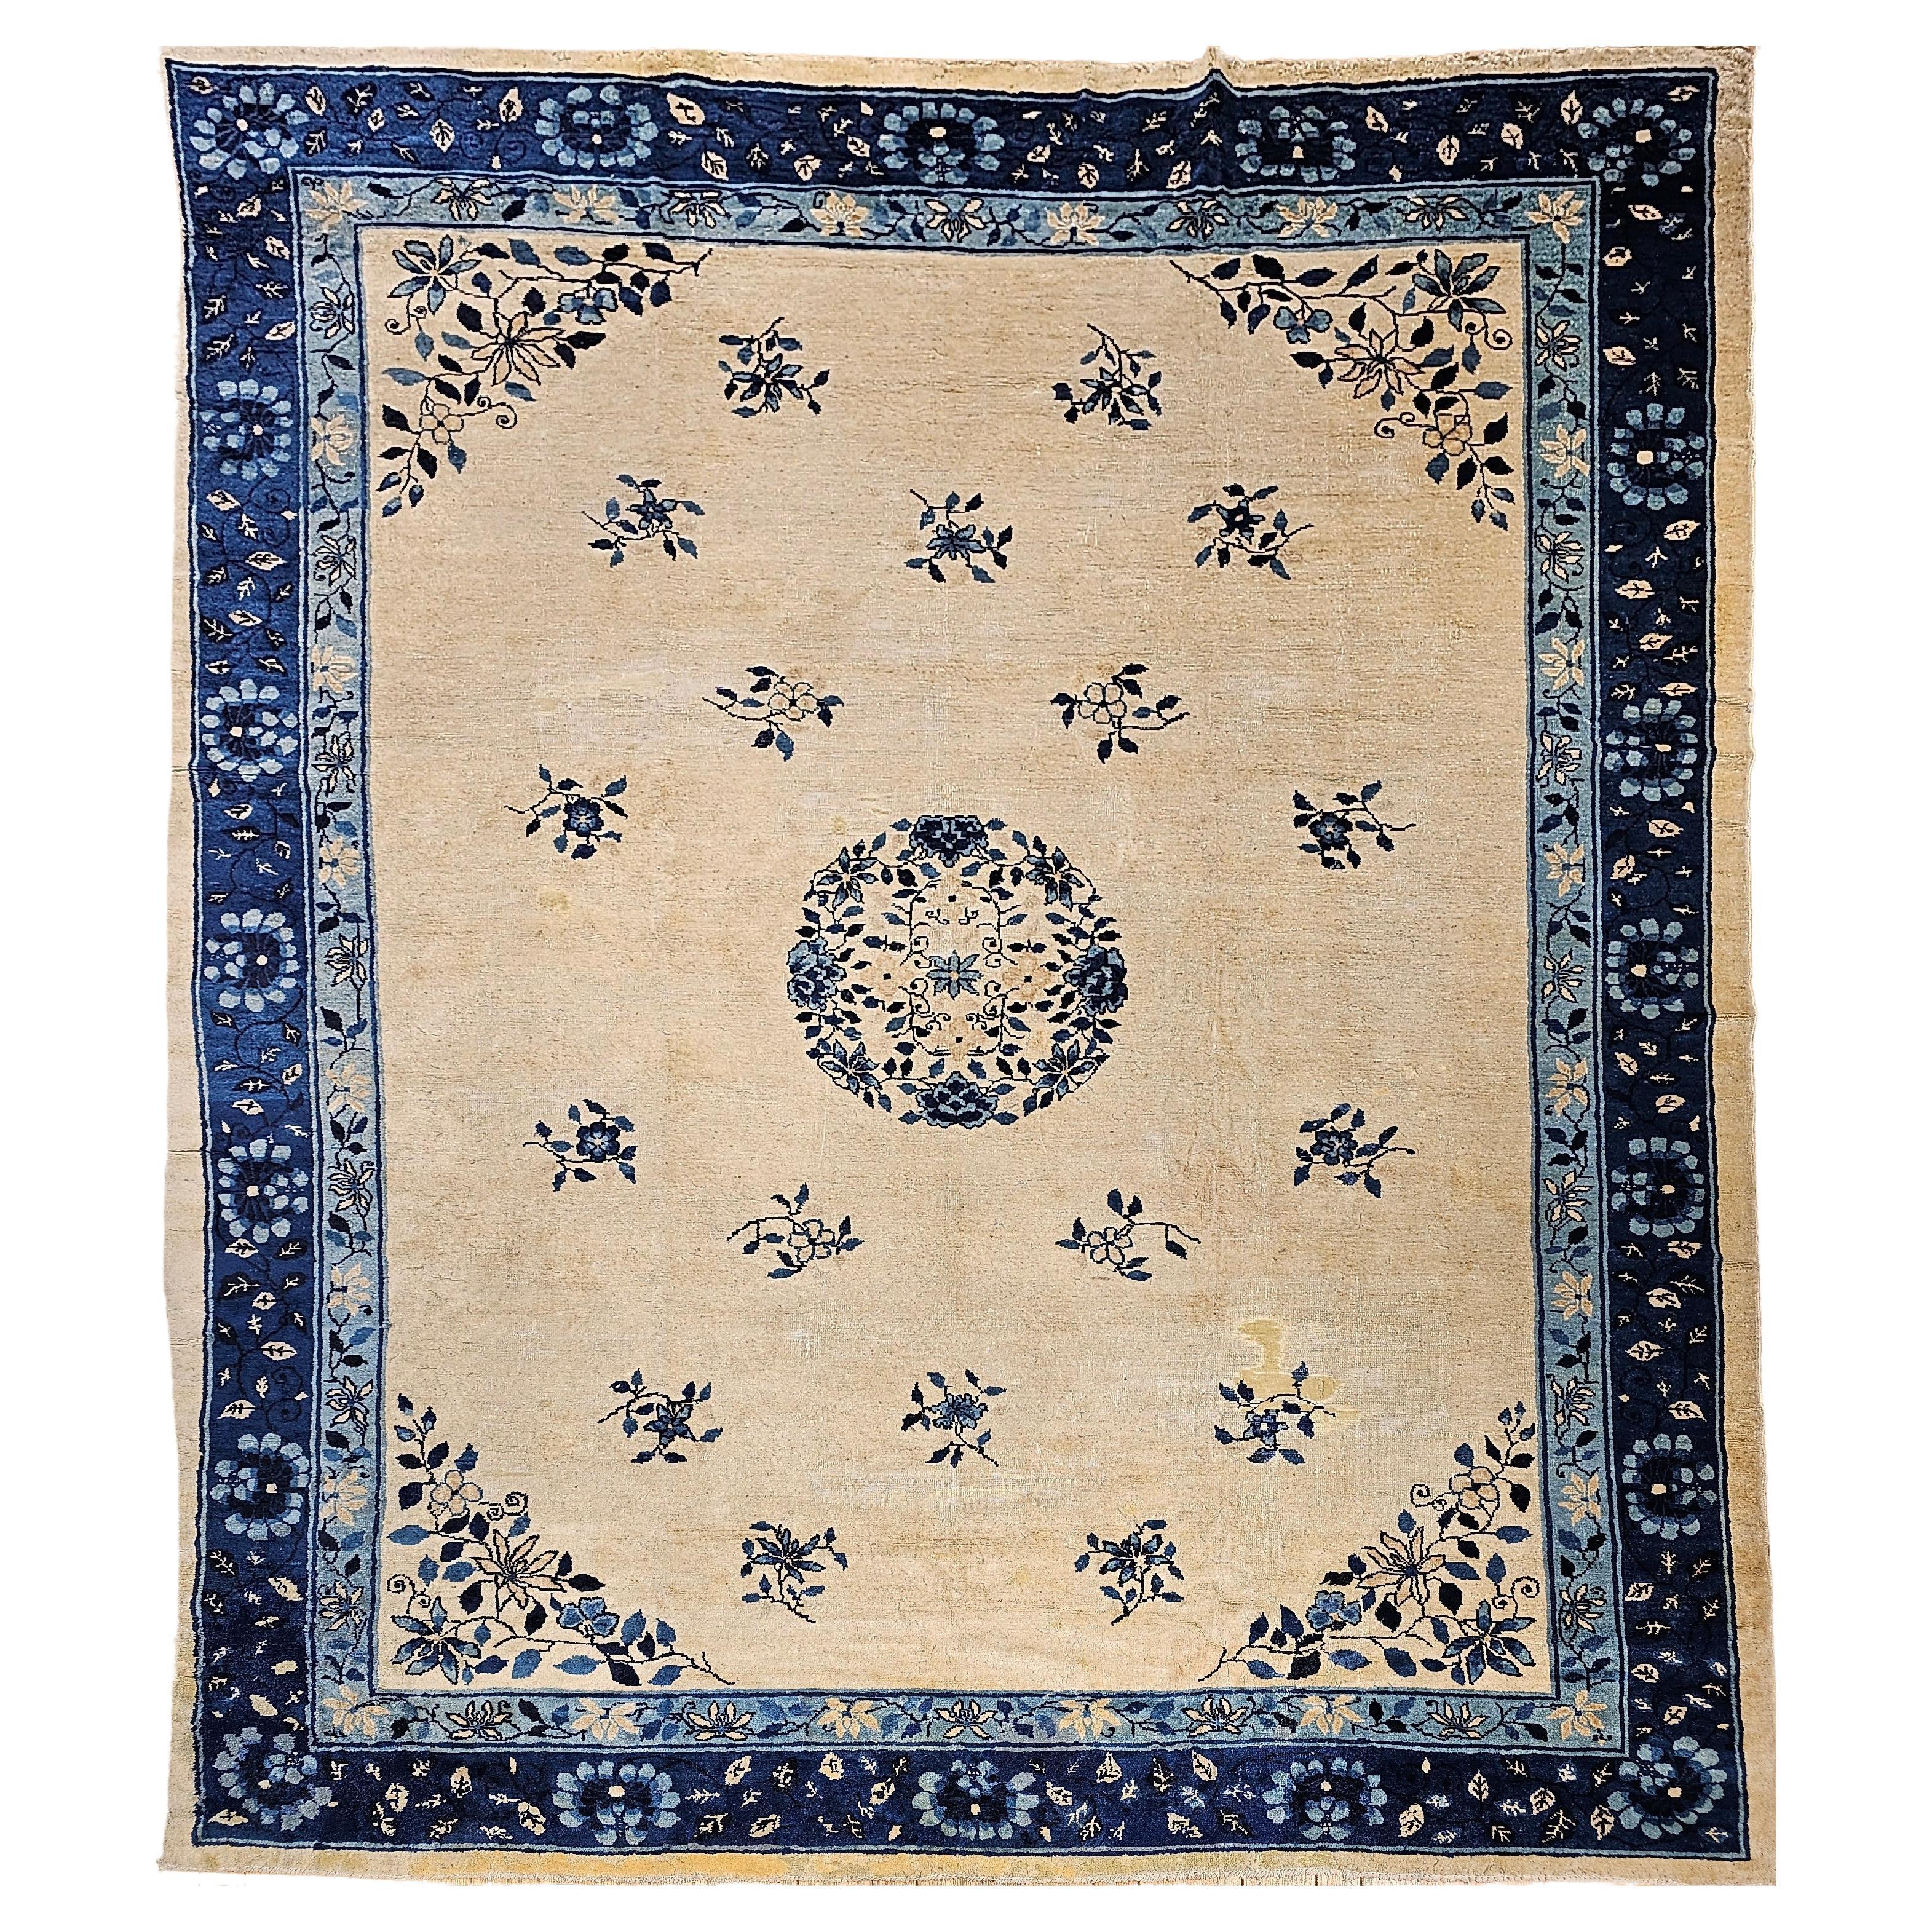 19th Century Room Size Chinese Peking Rug in Ivory, Navy, Baby Blue For Sale